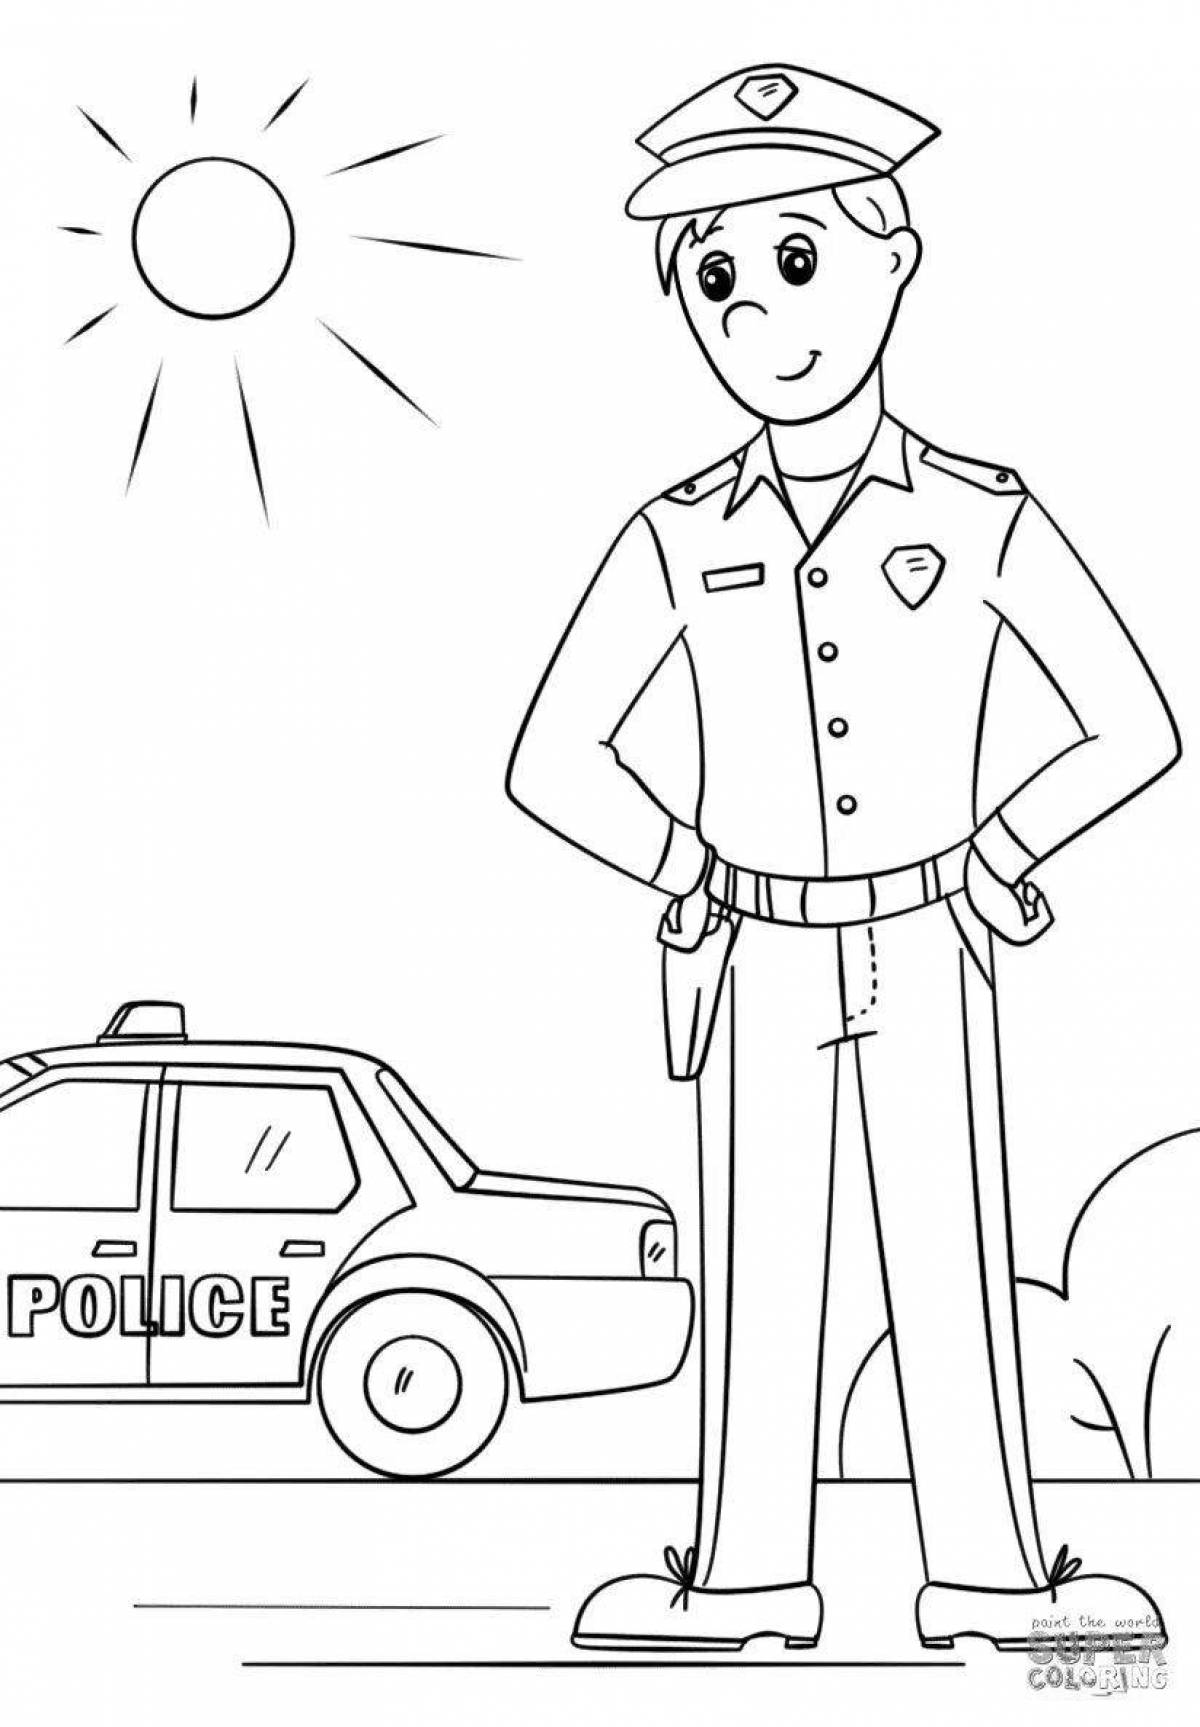 Inspirational traffic police coloring book